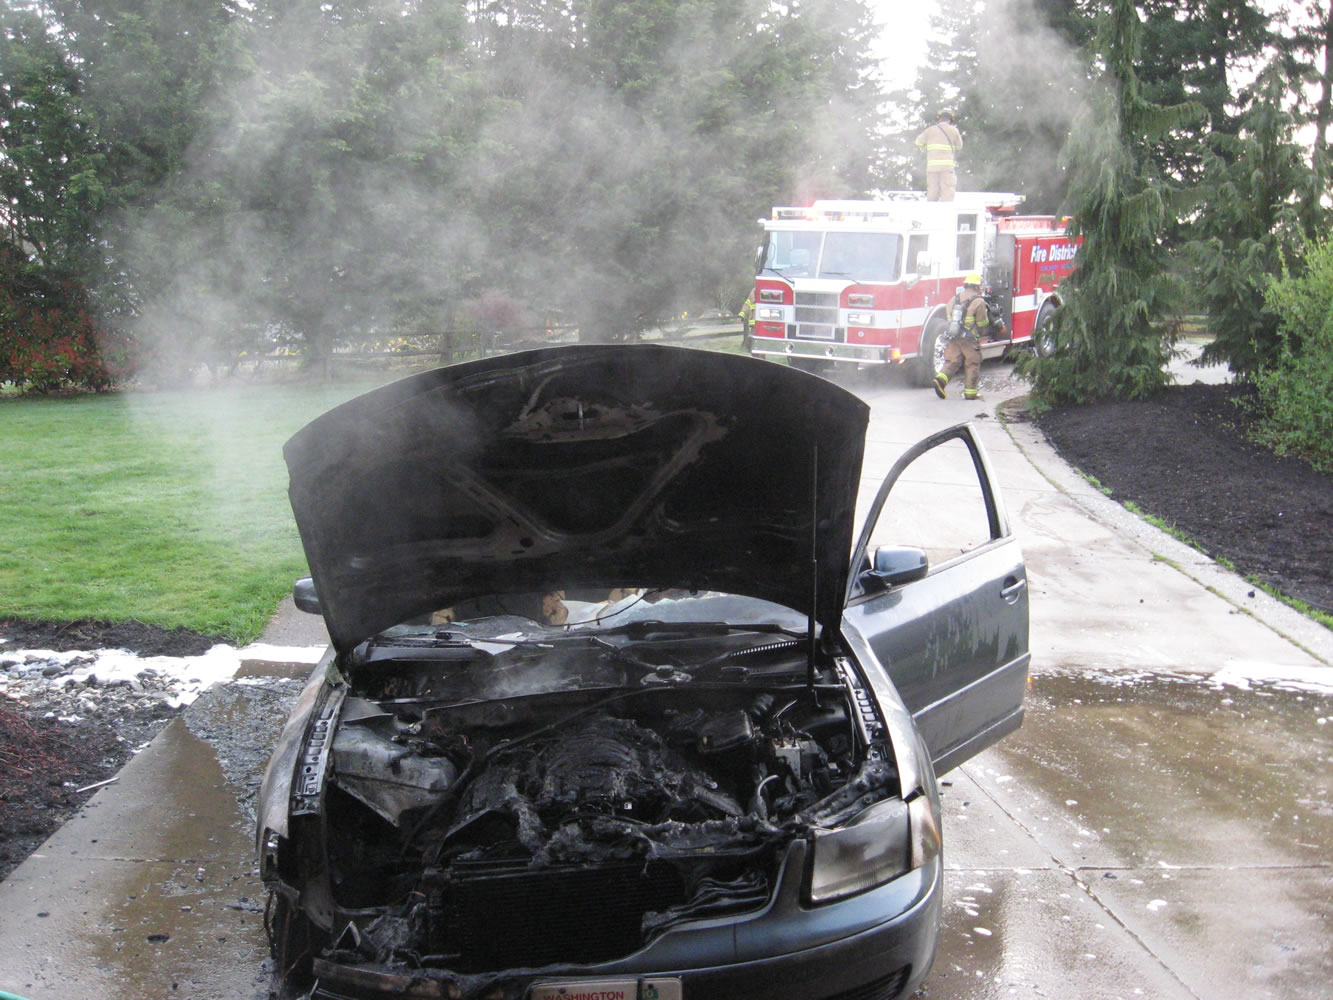 Firefighters with Clark County Fire District 3 doused a car fire in Brush Prairie Tuesday morning.